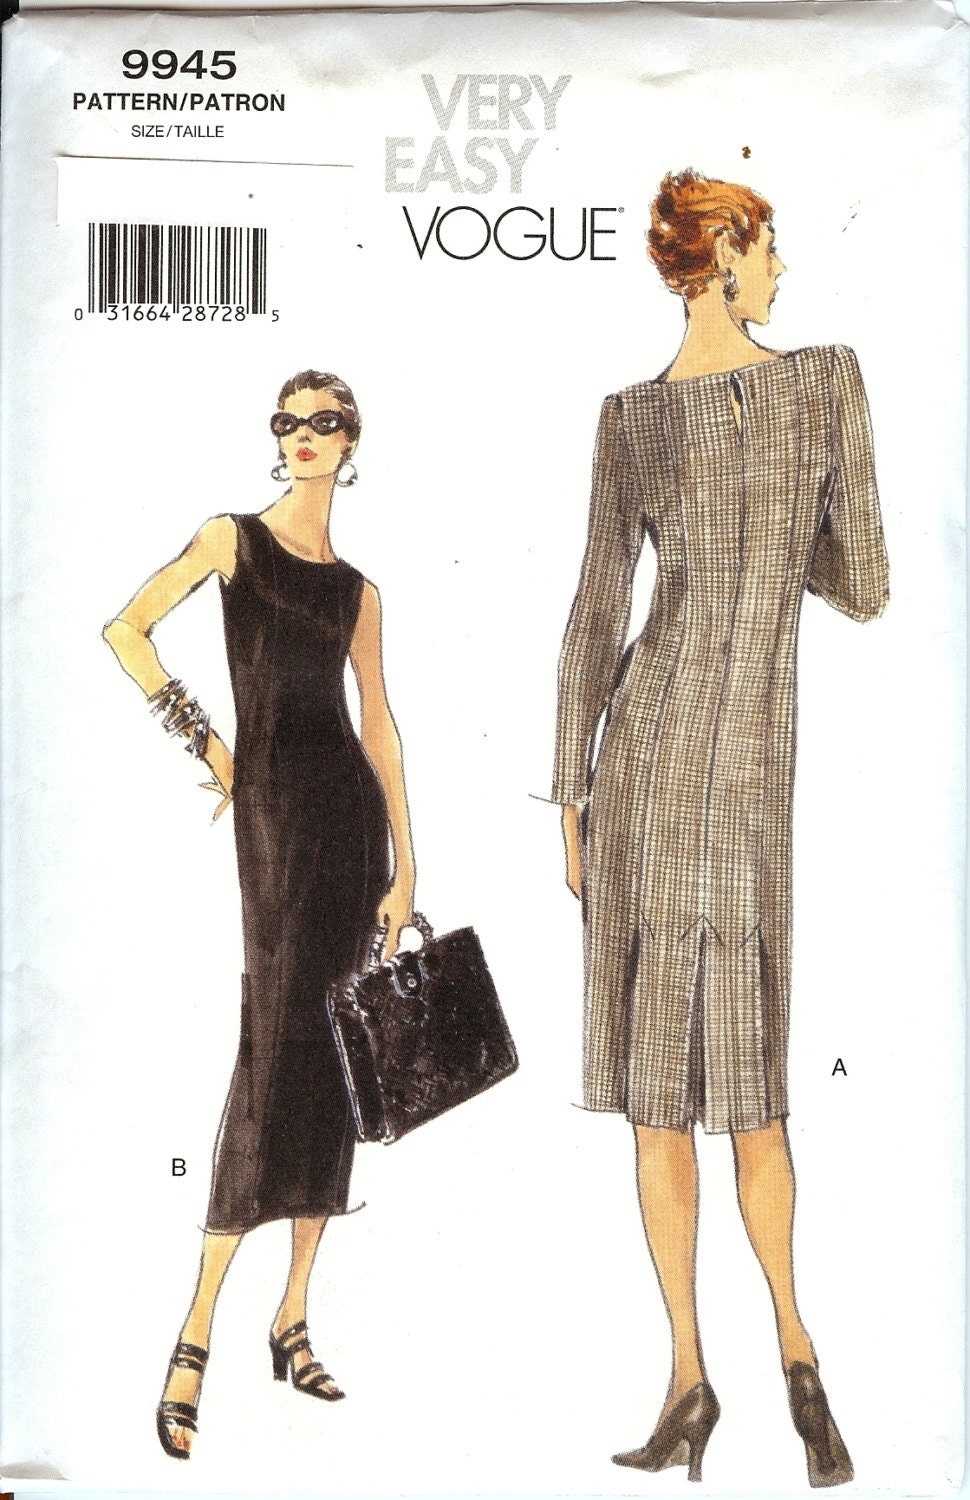 Very Easy Vogue Pattern 9945 Misses by AllThingsVogue on Etsy